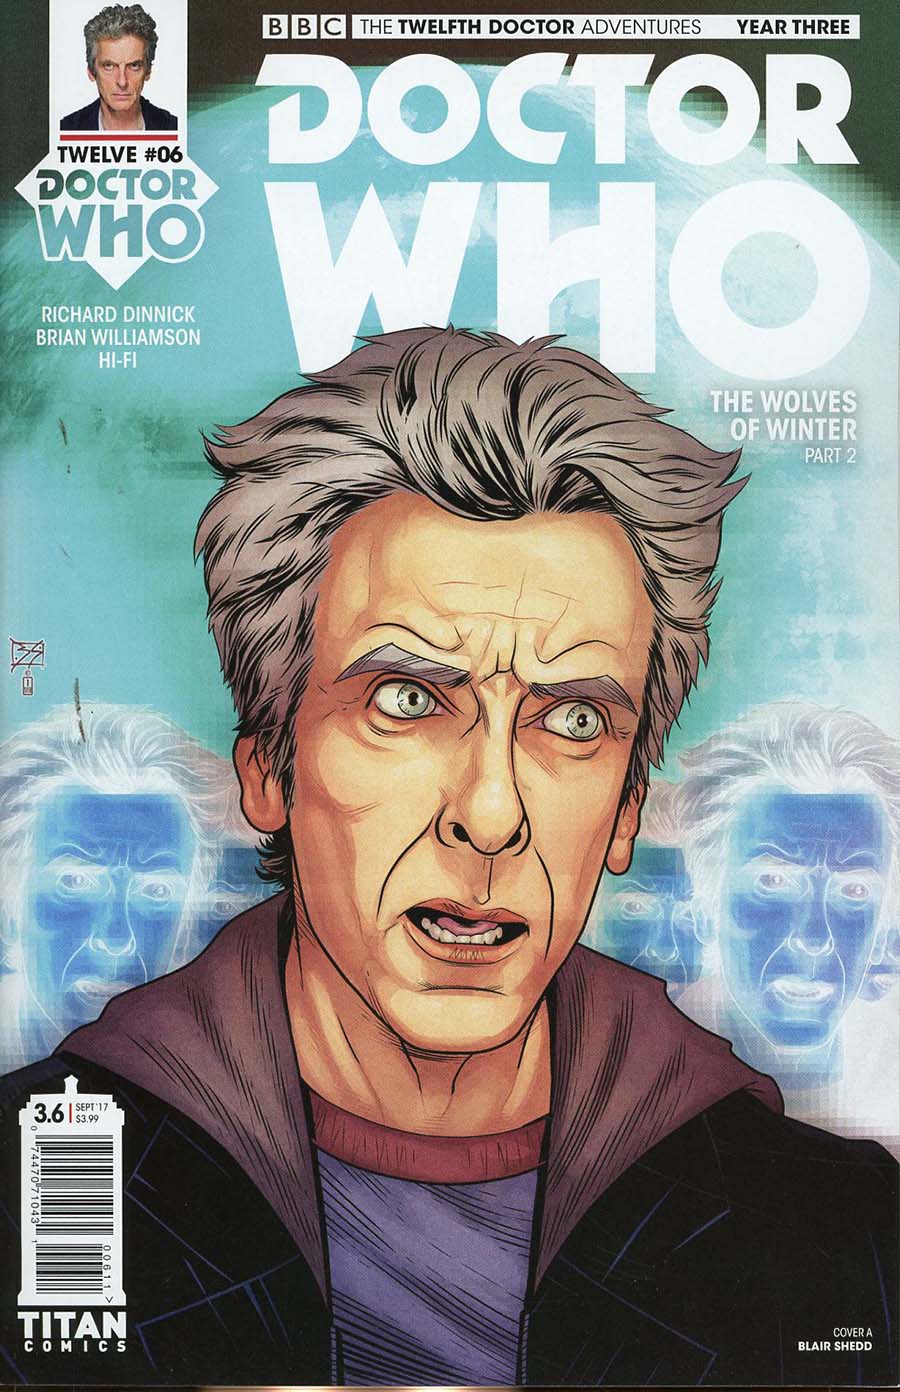 Doctor Who 12th Doctor Year Three #6 Cover A Regular Blair Shedd Cover